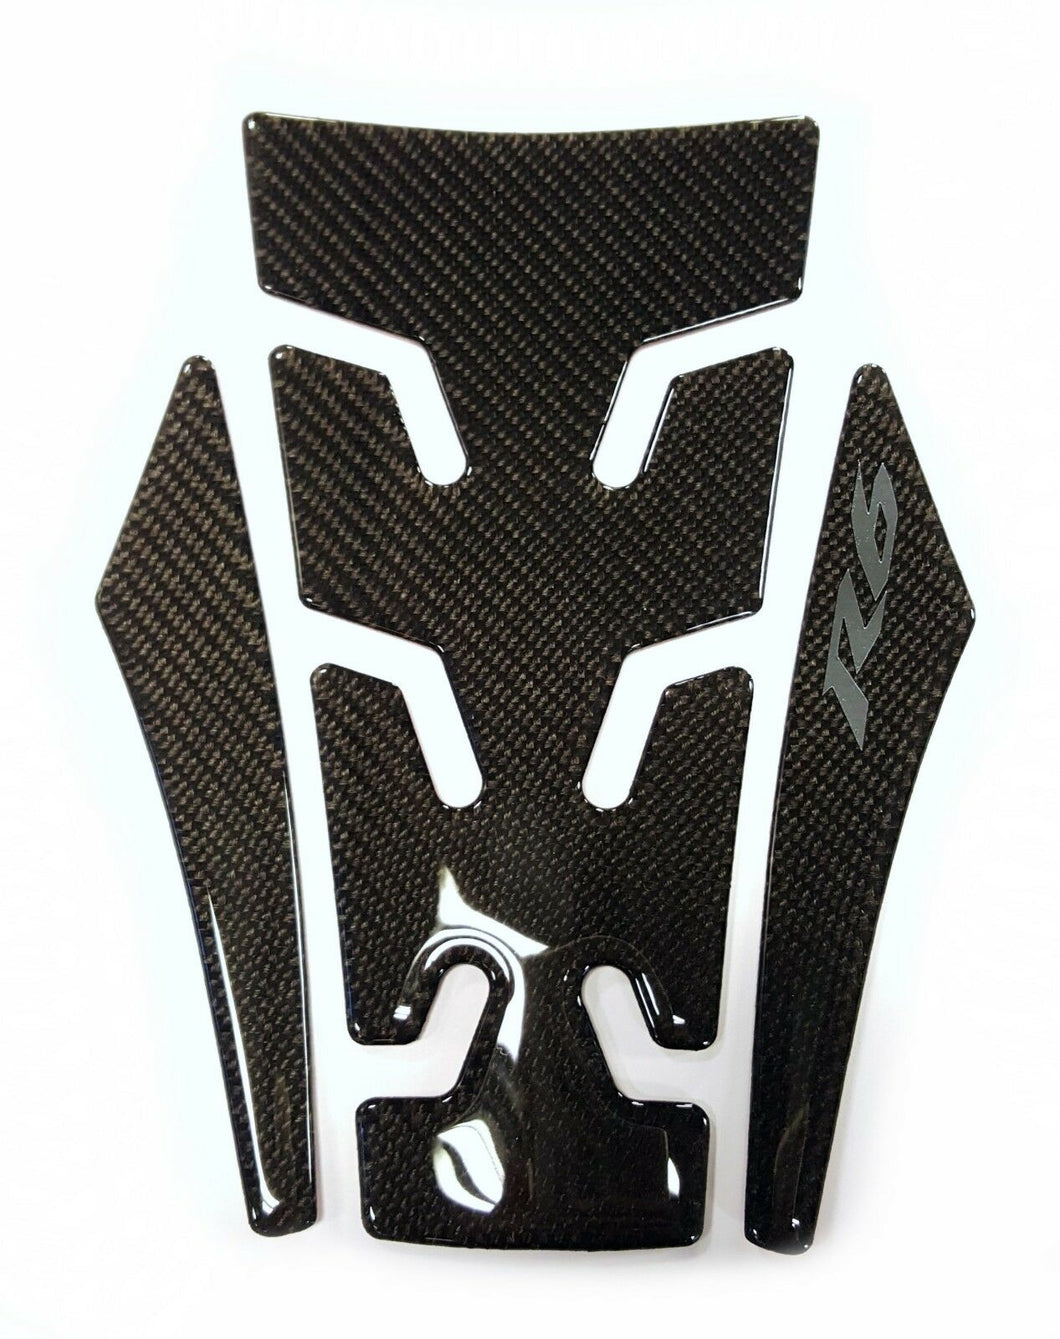 Fit Yamaha R6 YZF-R6 real carbon fiber tank Protector pad Decal Sticker trim